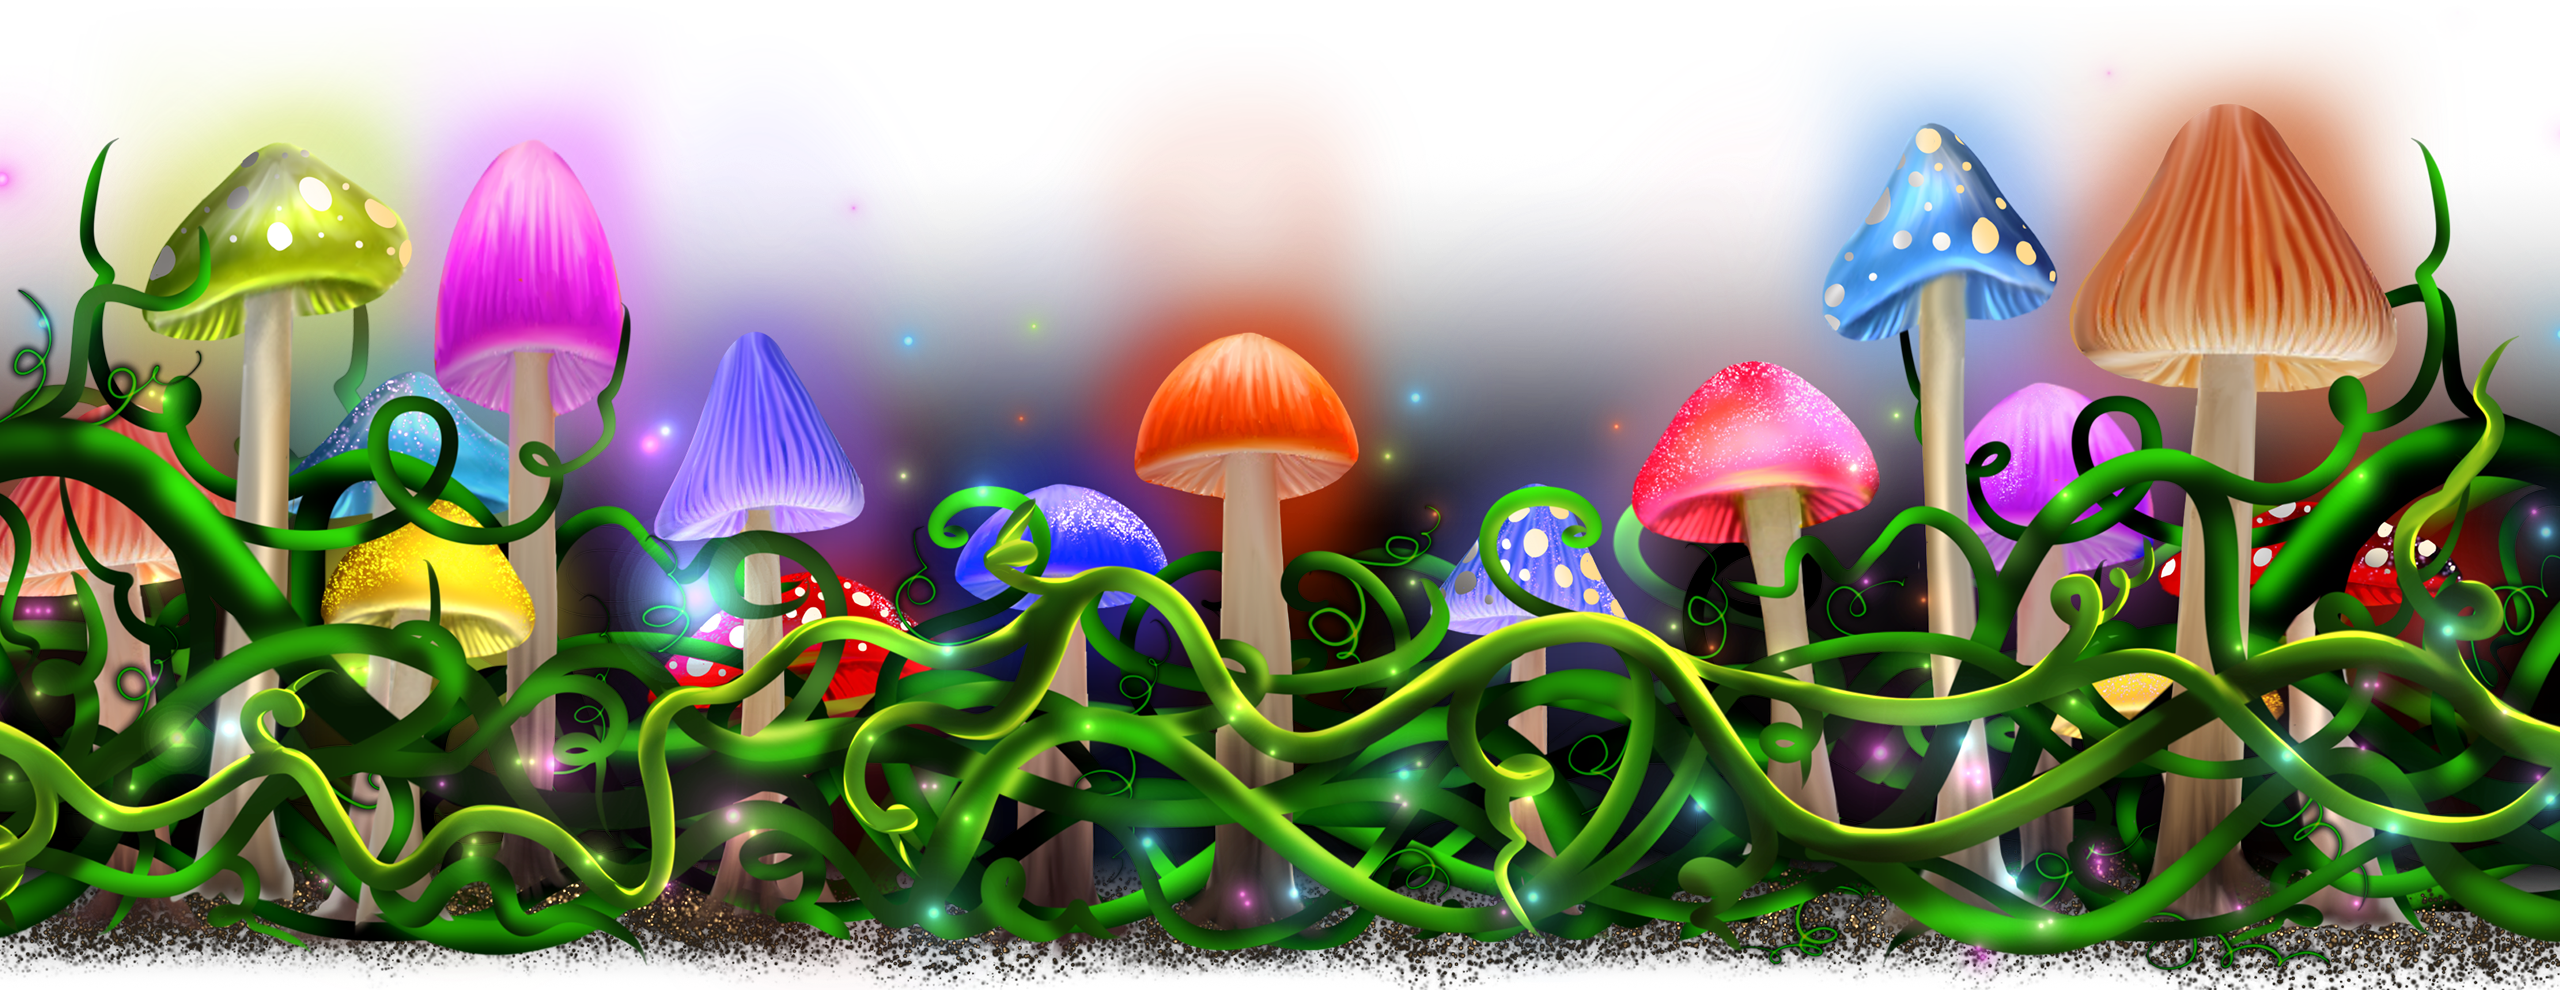 Colored mushrooms on top of vines